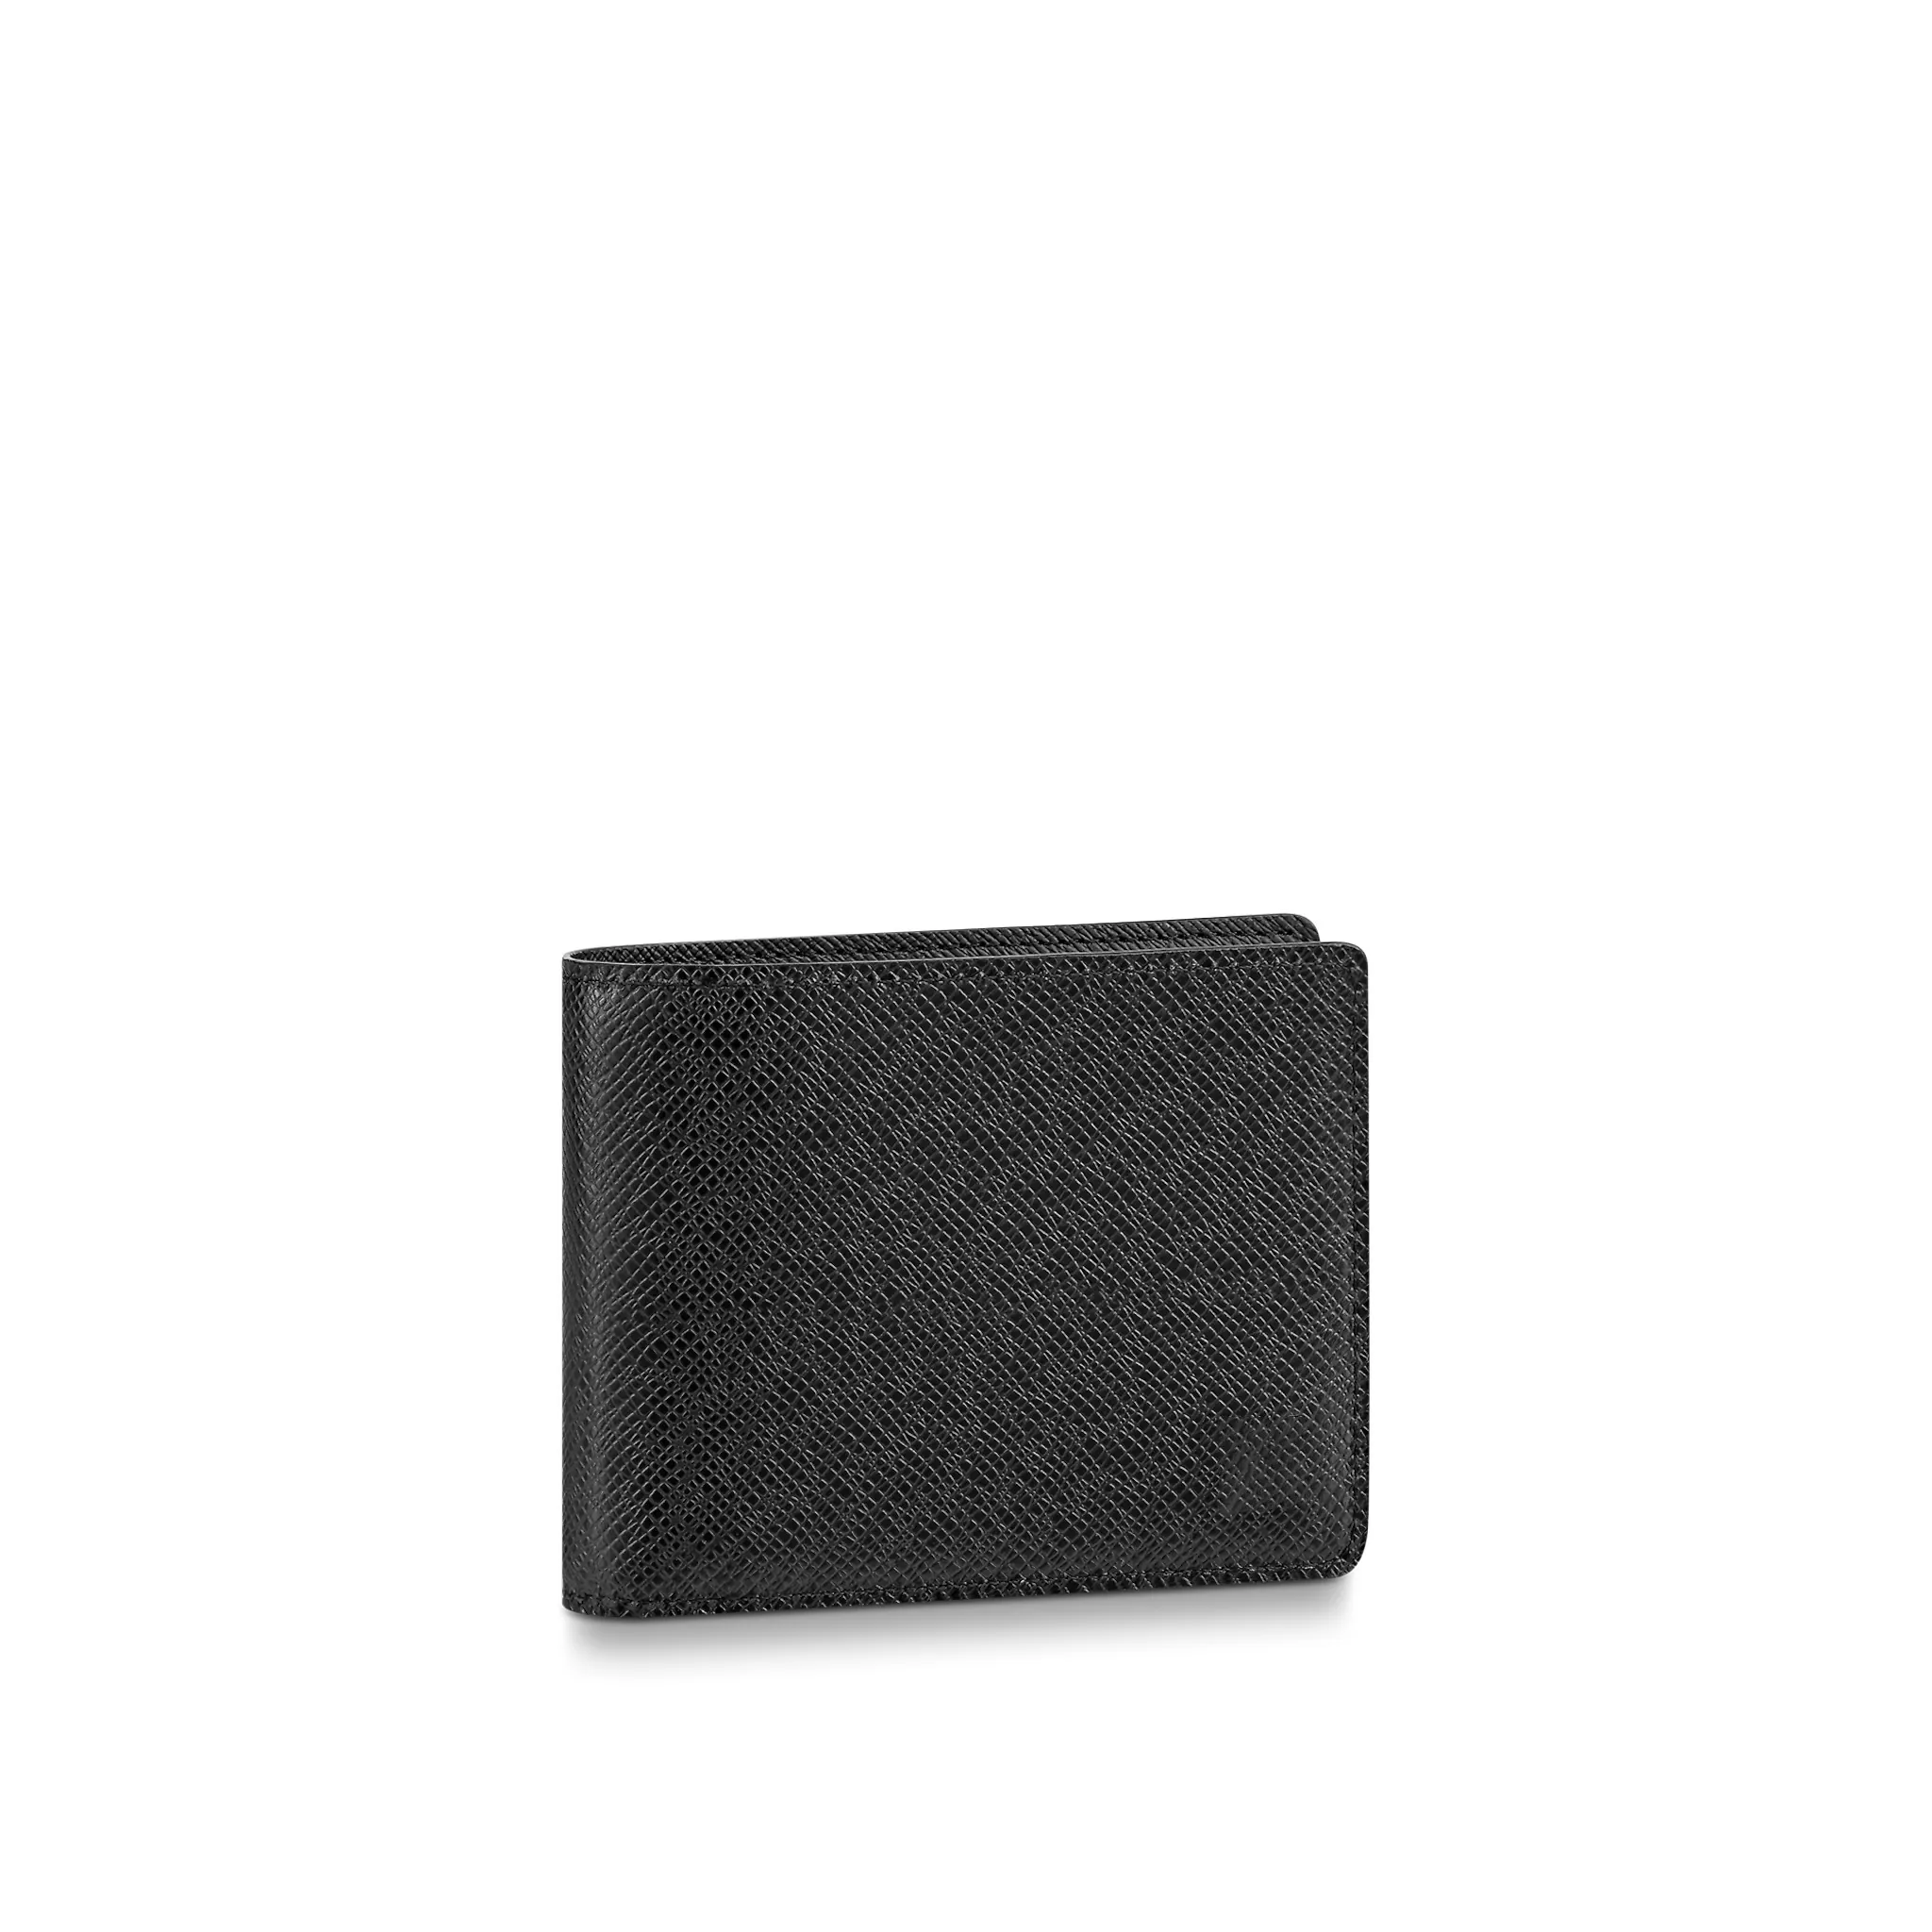 L Luxurys Wallets Presher Wable Wable Wallet Wallet Mens Classic Wallet With Box and Card Hands Handle Leather